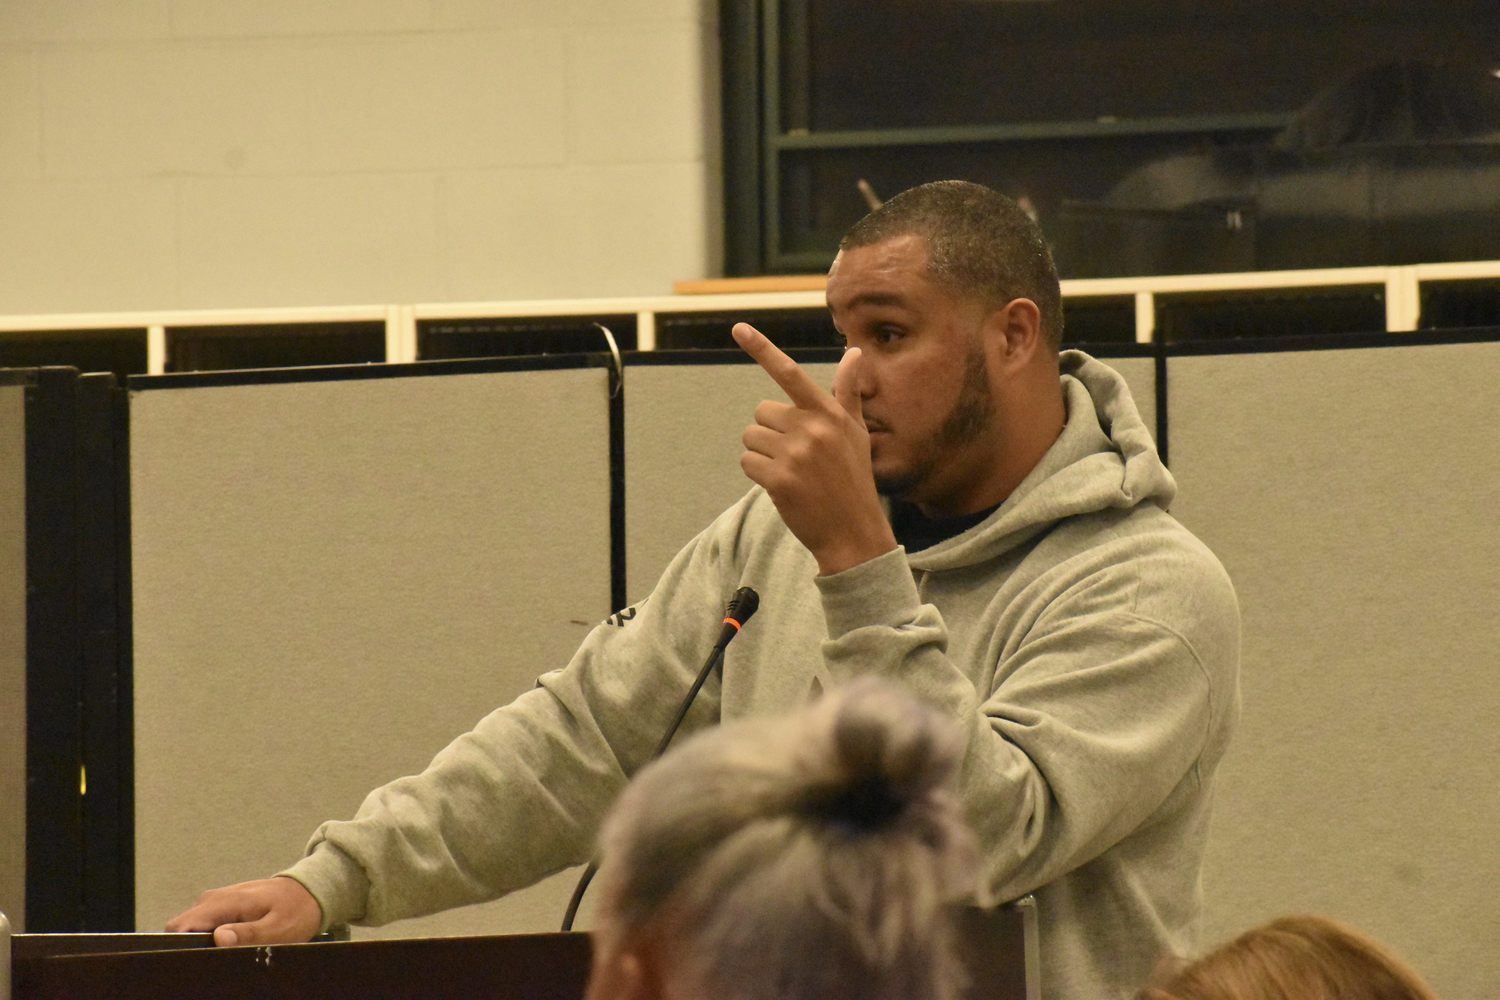 Shawn Smith speaks at a Southampton Board of Education meeting on October 24. STEPHEN J. KOTZ